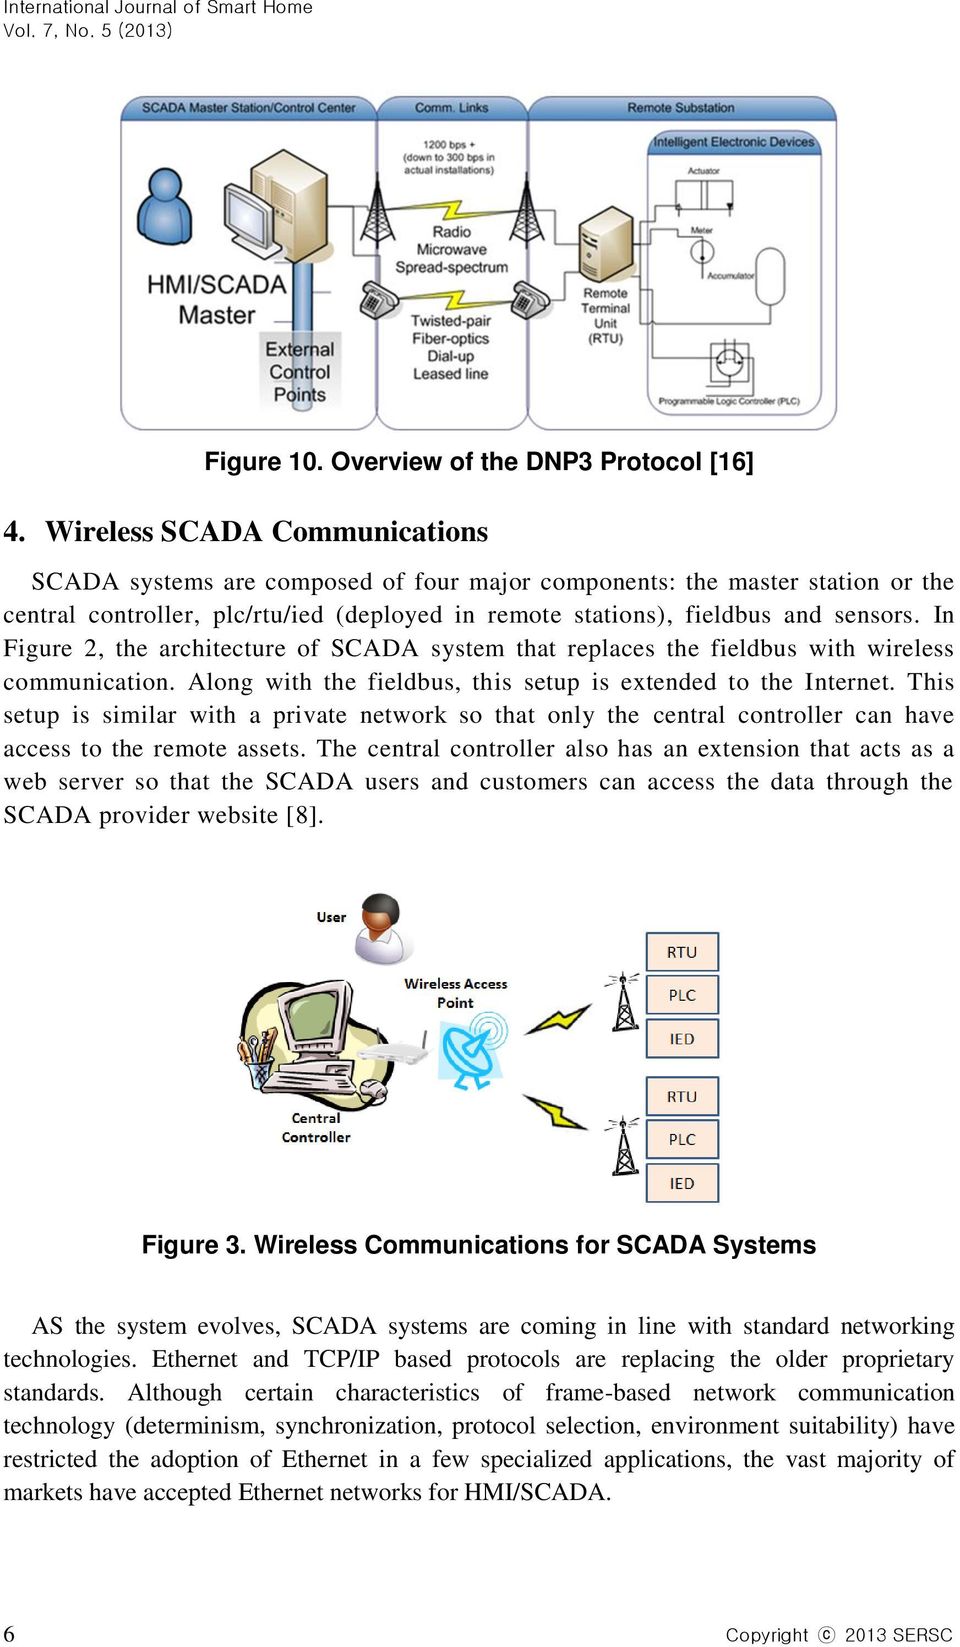 In Figure 2, the architecture of SCADA system that replaces the fieldbus with wireless communication. Along with the fieldbus, this setup is extended to the Internet.